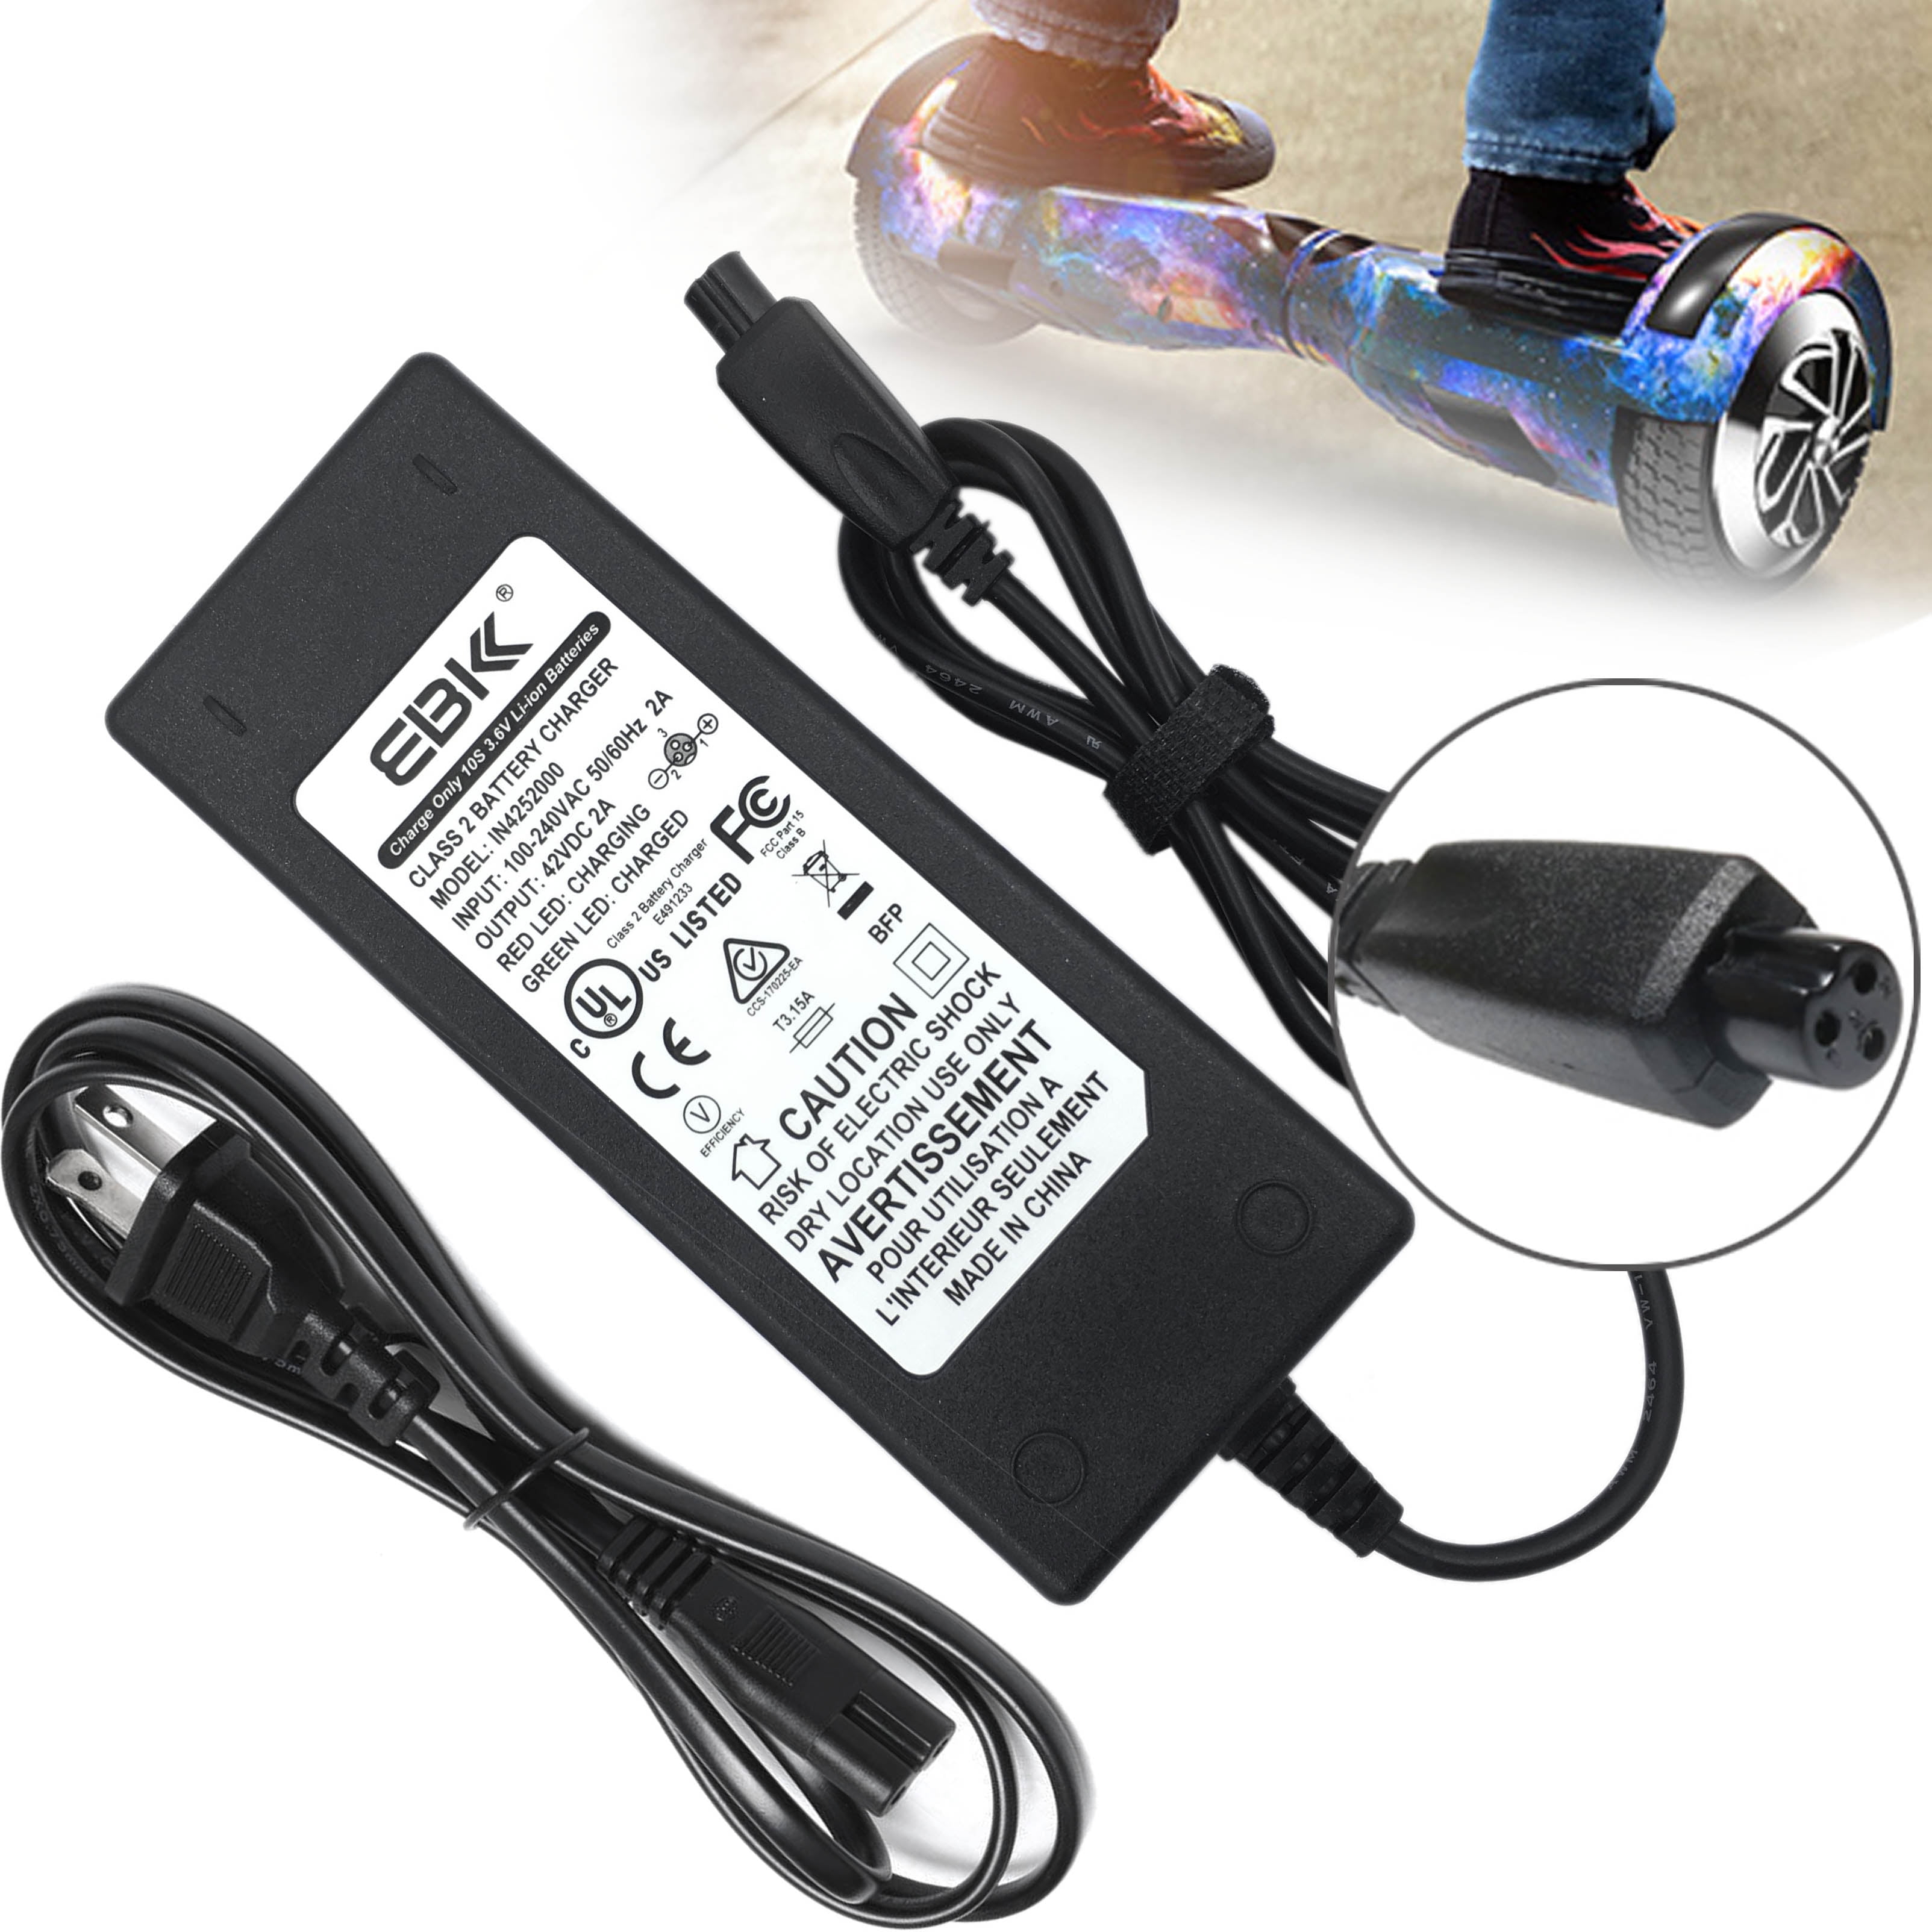 Details about   Charger Plug Cable 42V 2A AC/DC Power Adapter For Balancing Scooter Charge 